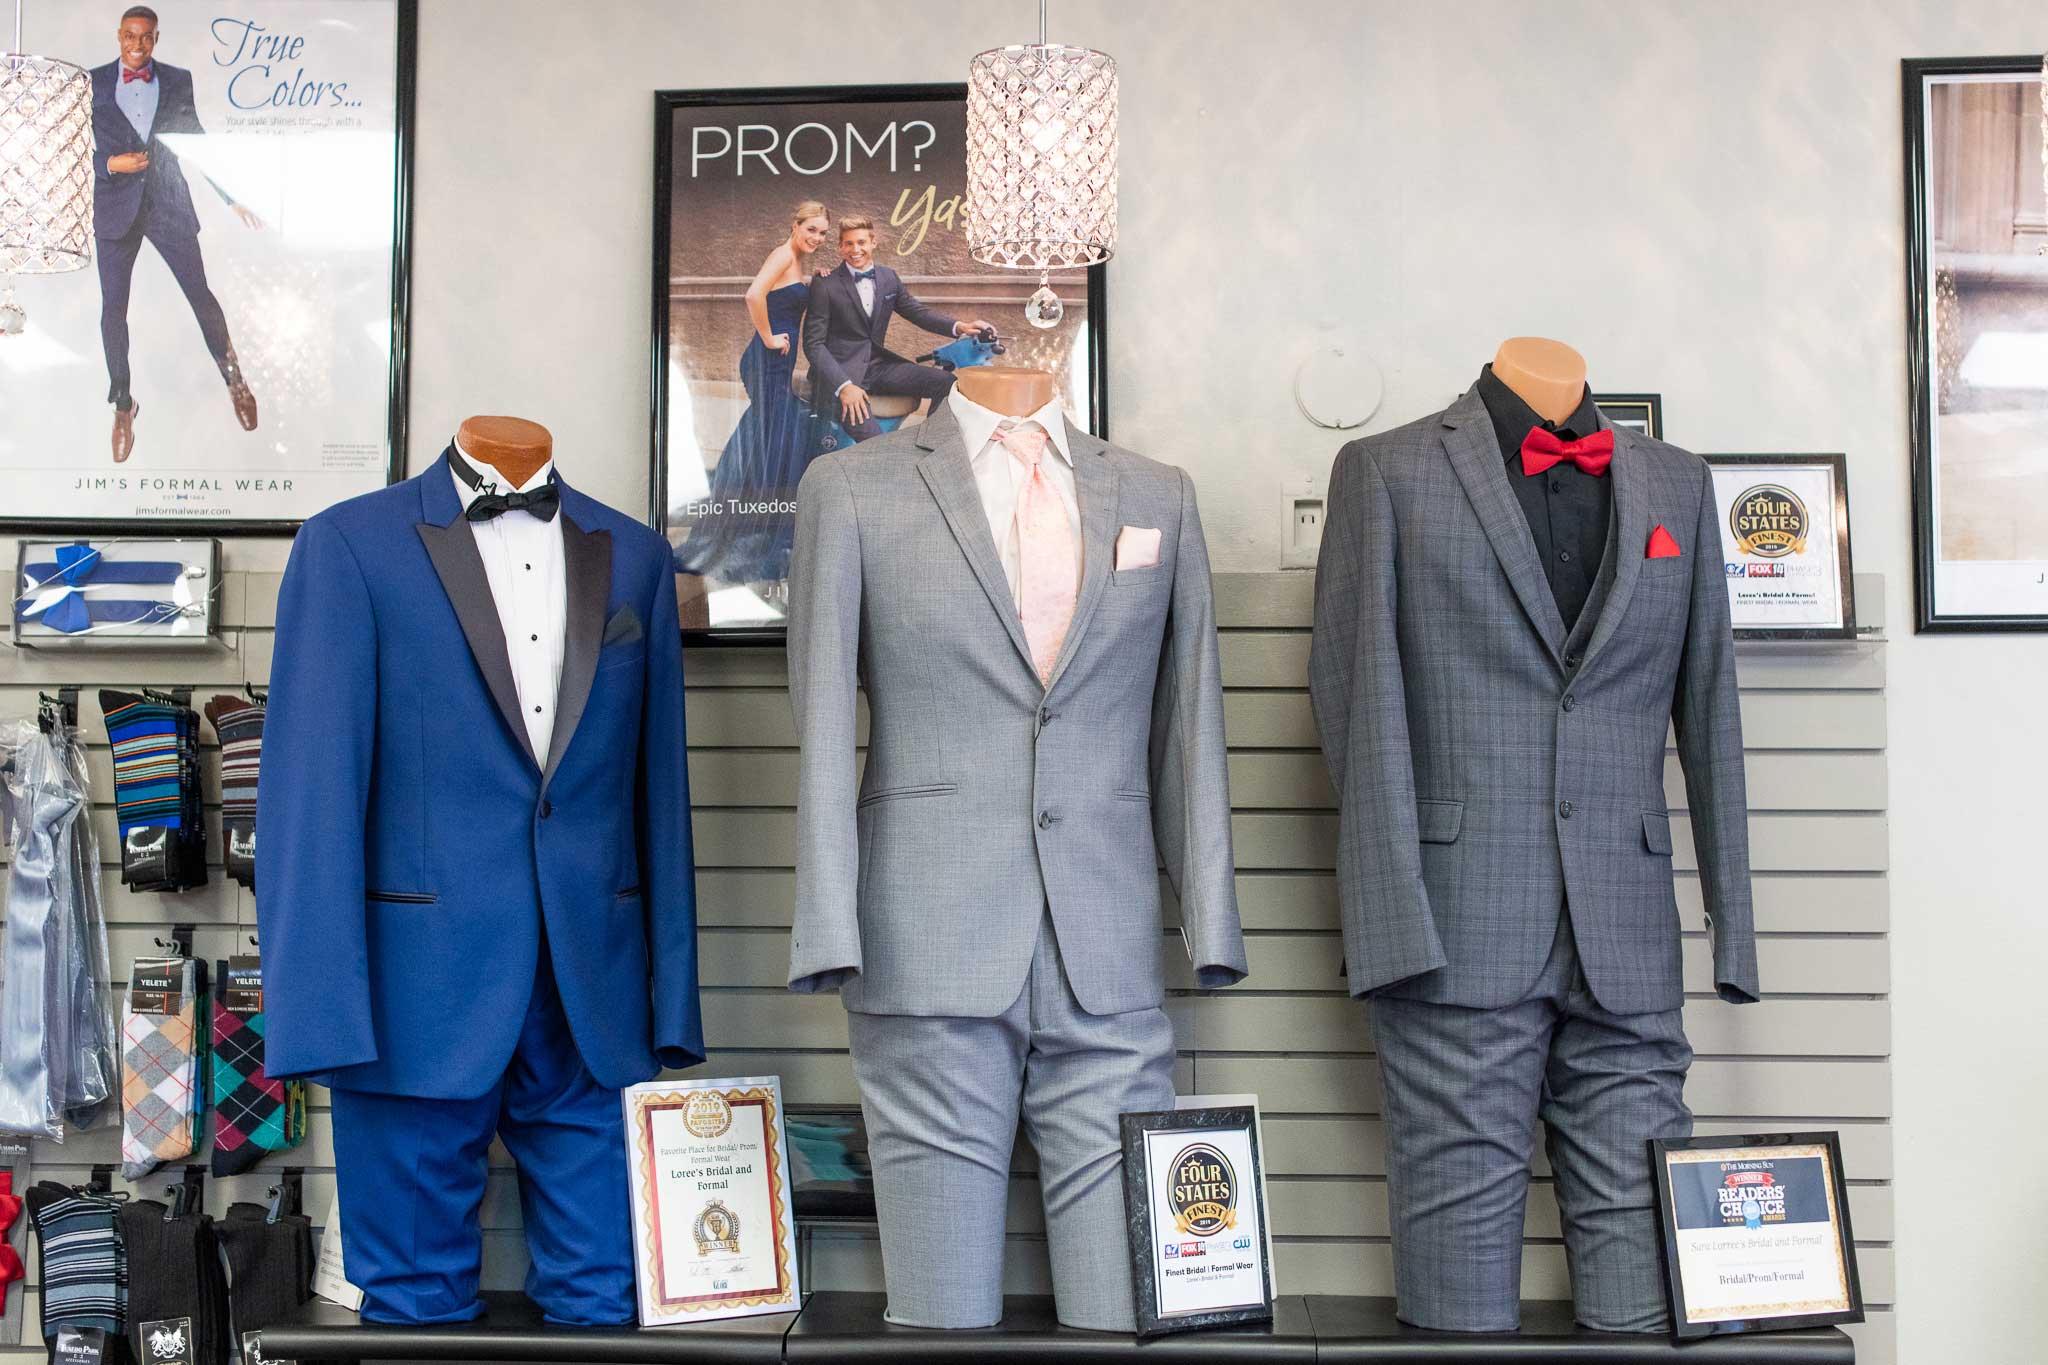 Suits lined up along a wall